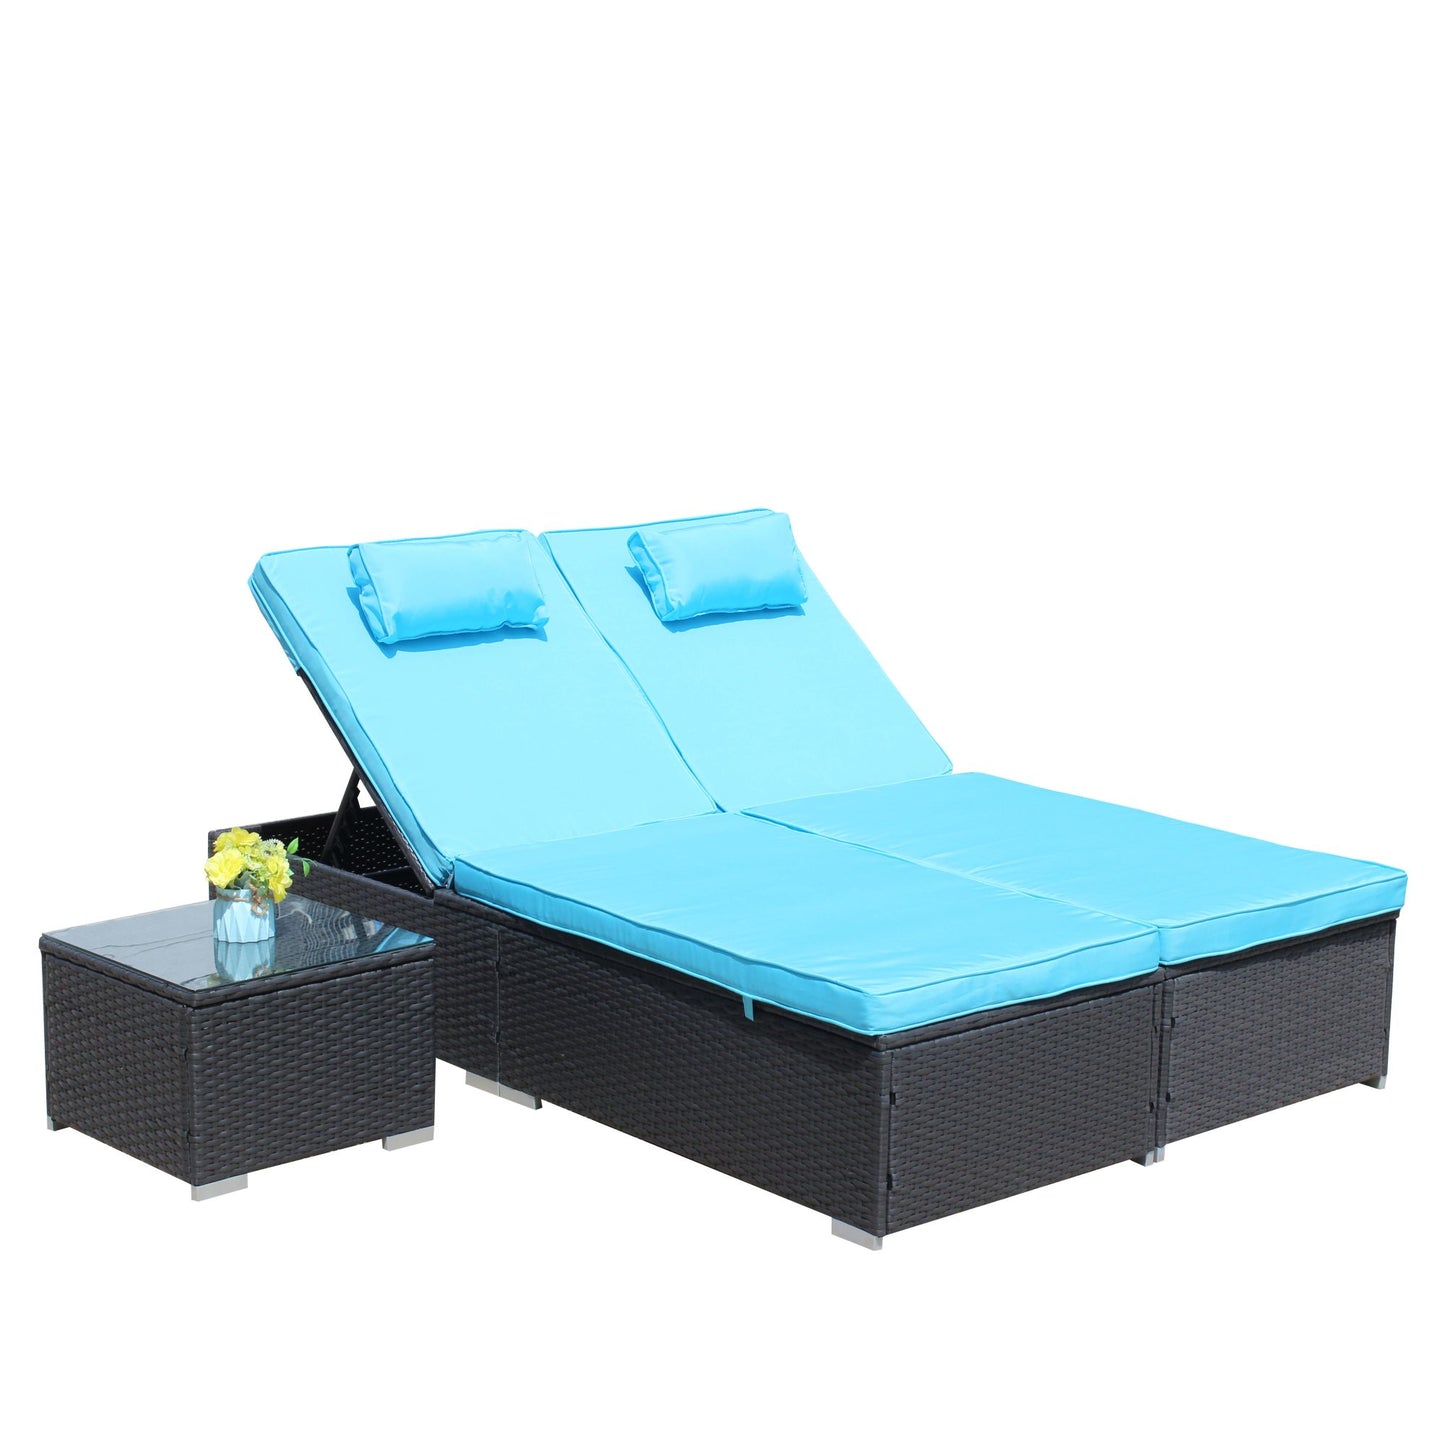 3-Piece Outdoor Patio Furniture Set Chaise Lounge, Patio Reclining Rattan Lounge Chair Chaise Couch Cushioned with Glass Coffee Table, Adjustable Back and Feet, Lounger Chair for Pool Garden, Blue